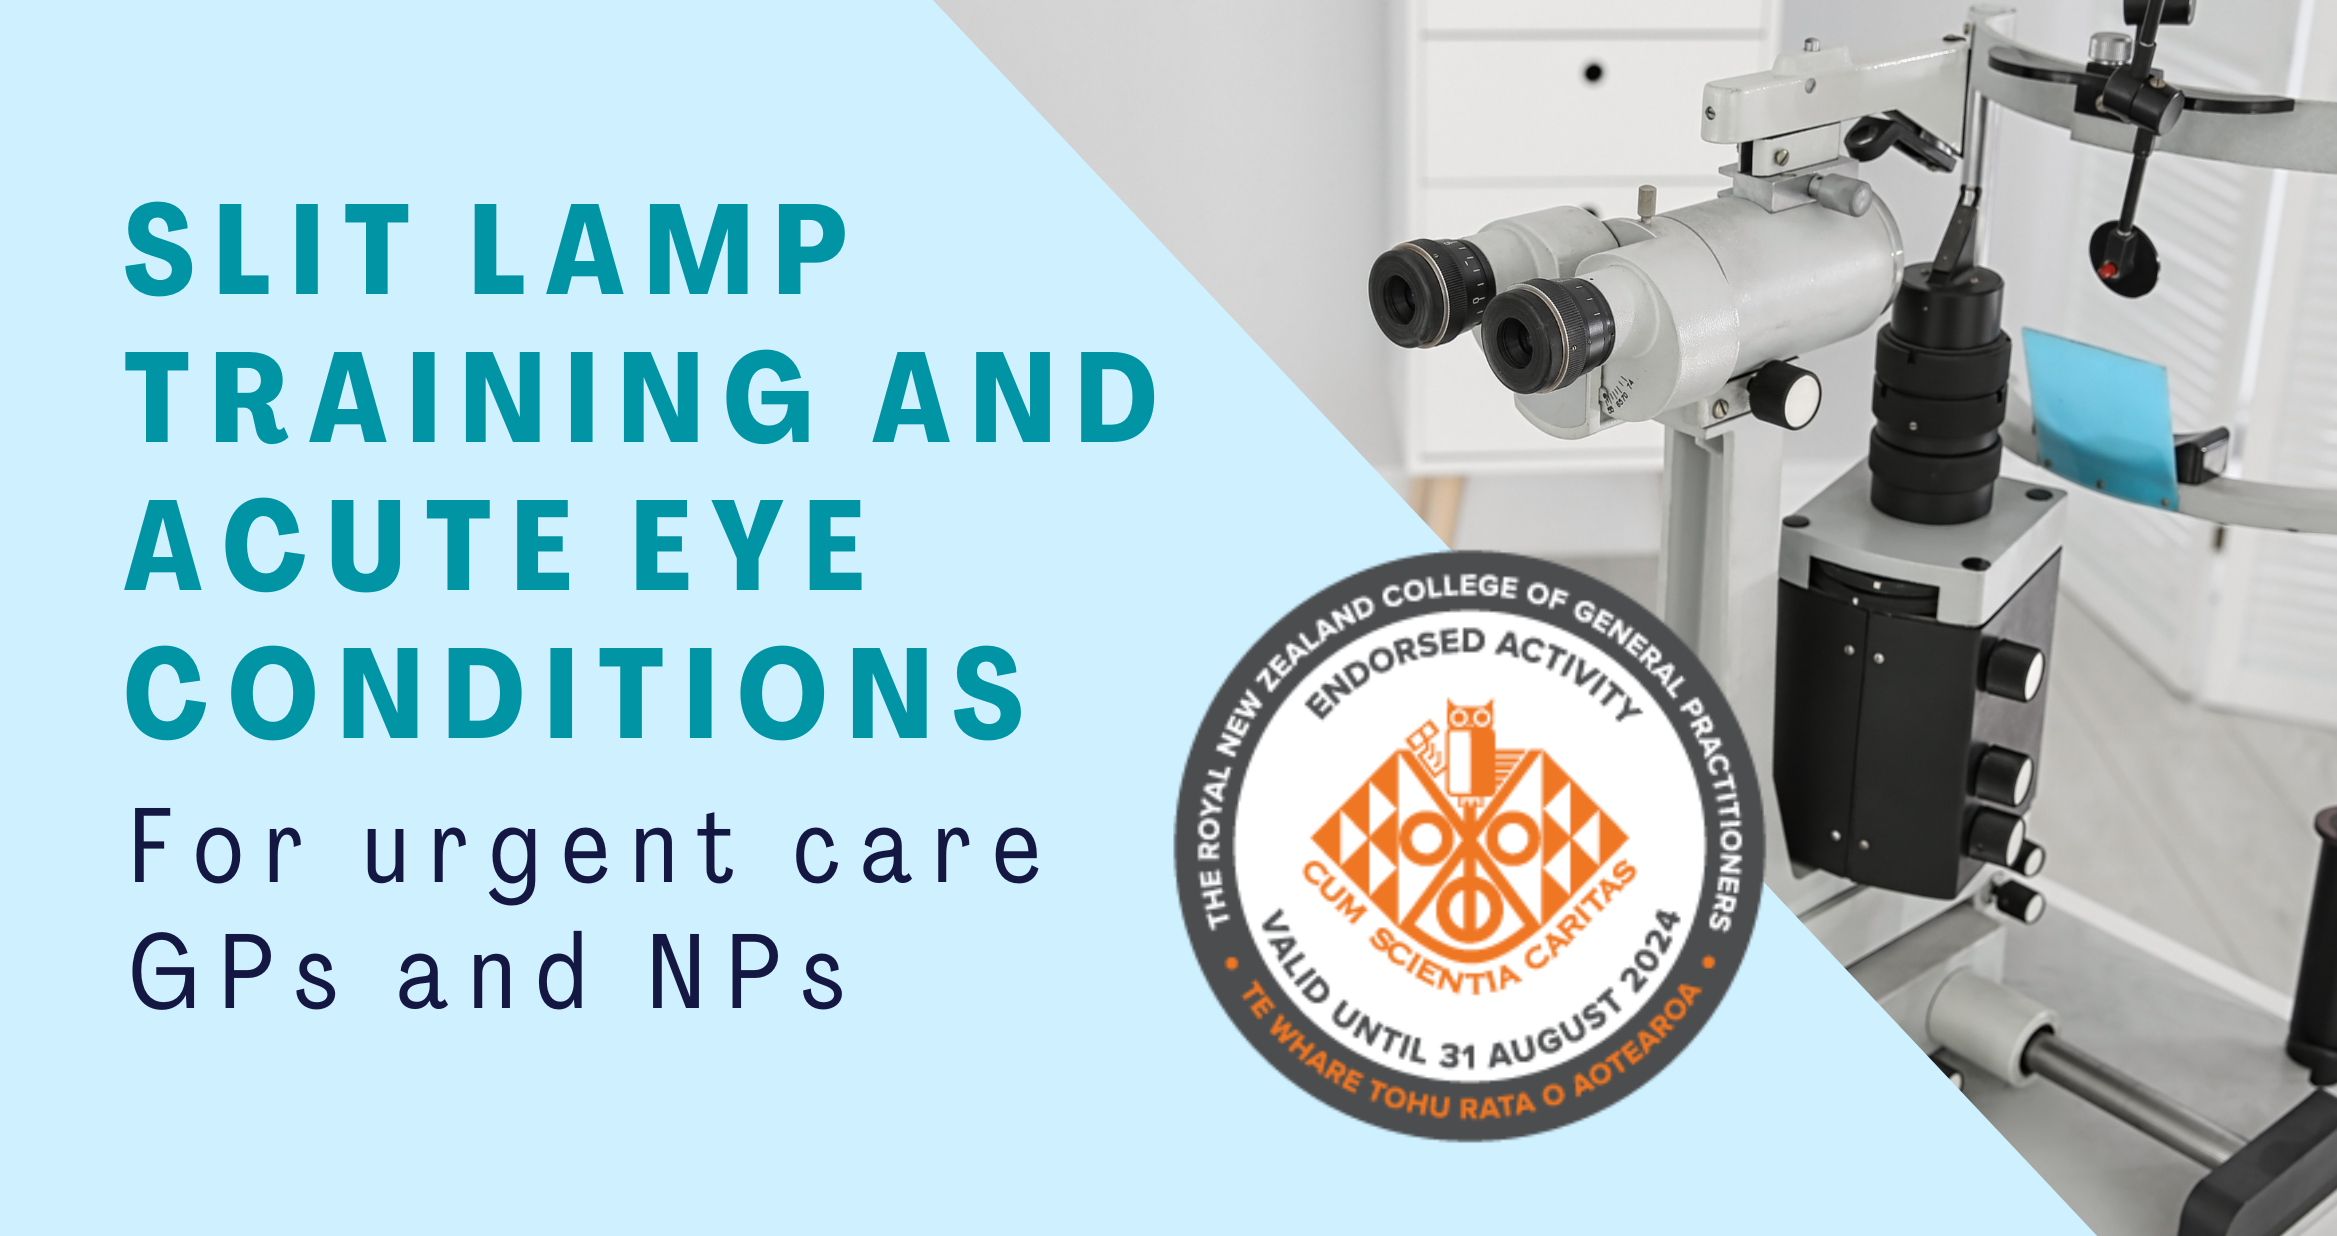 Slit Lamp Training and Acute Eye Conditions July 24